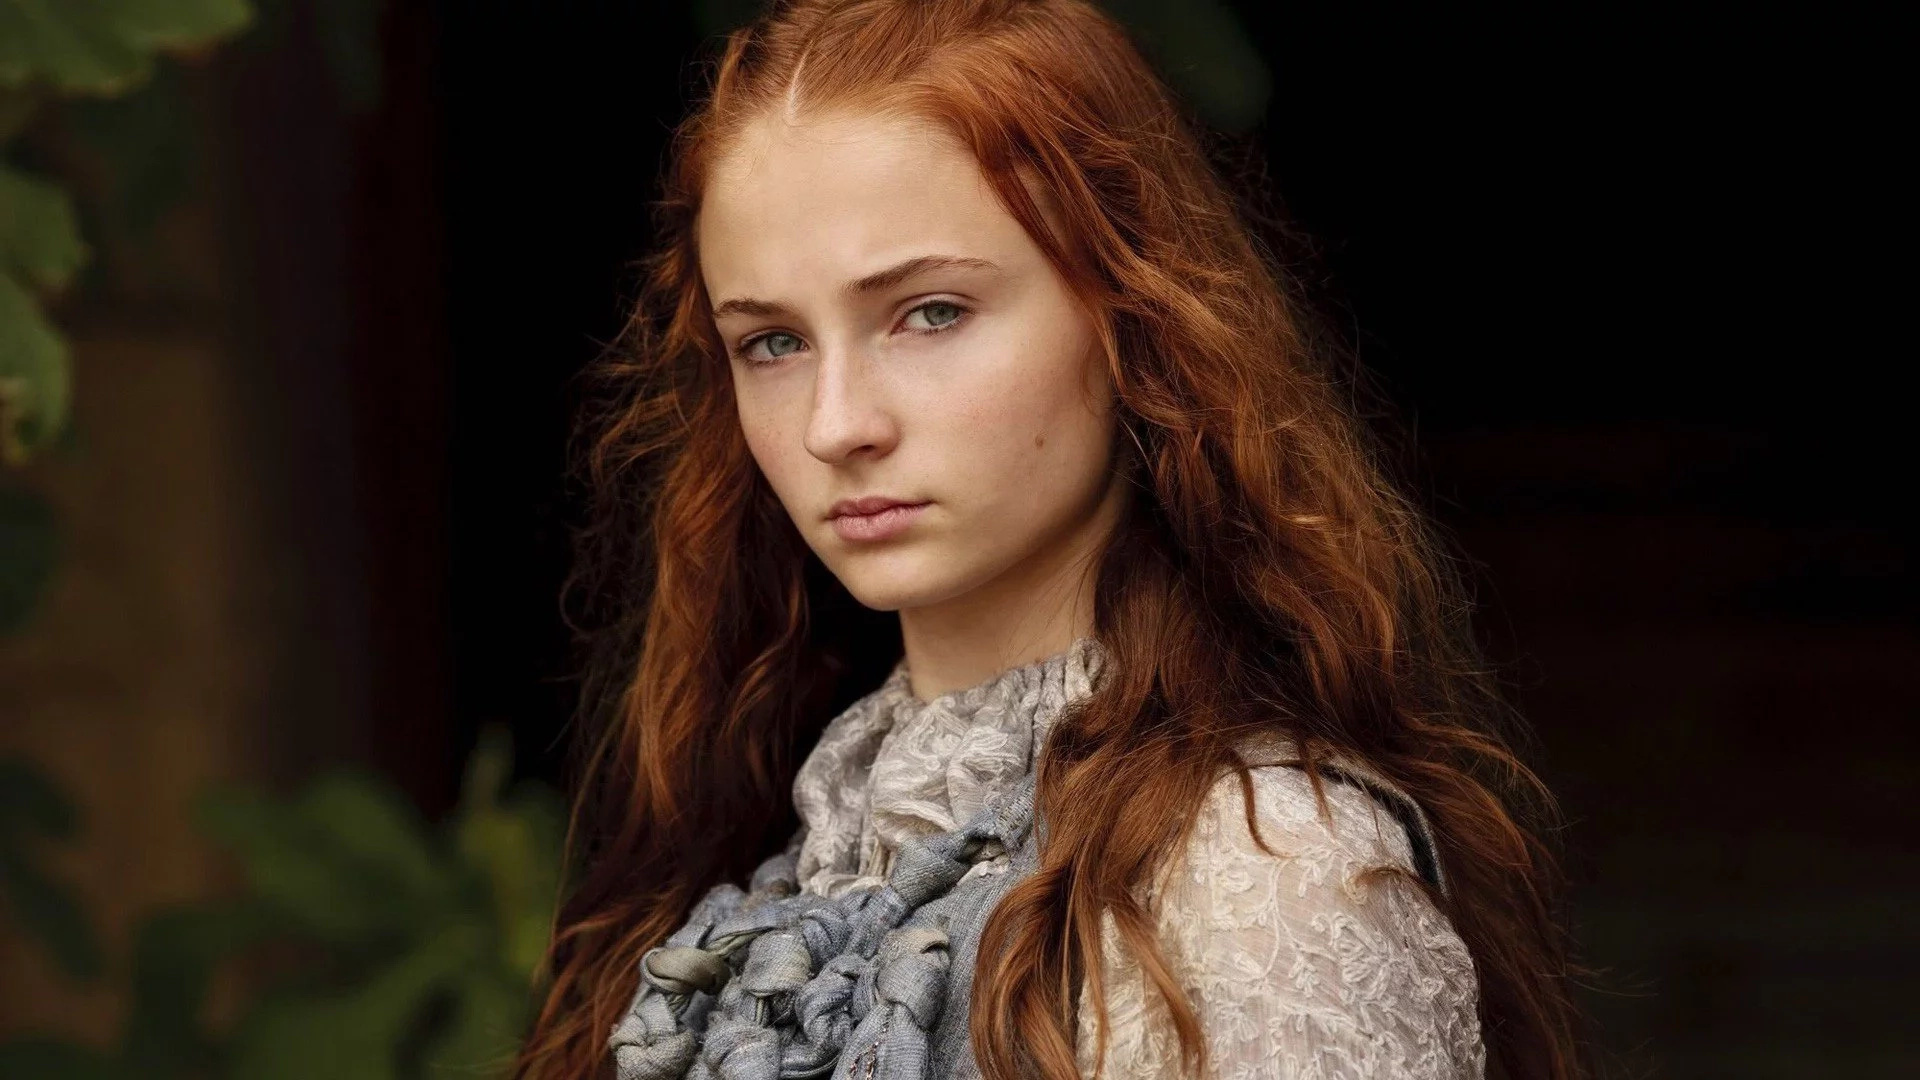 5 ‘Game of Thrones’ characters we do not want to die